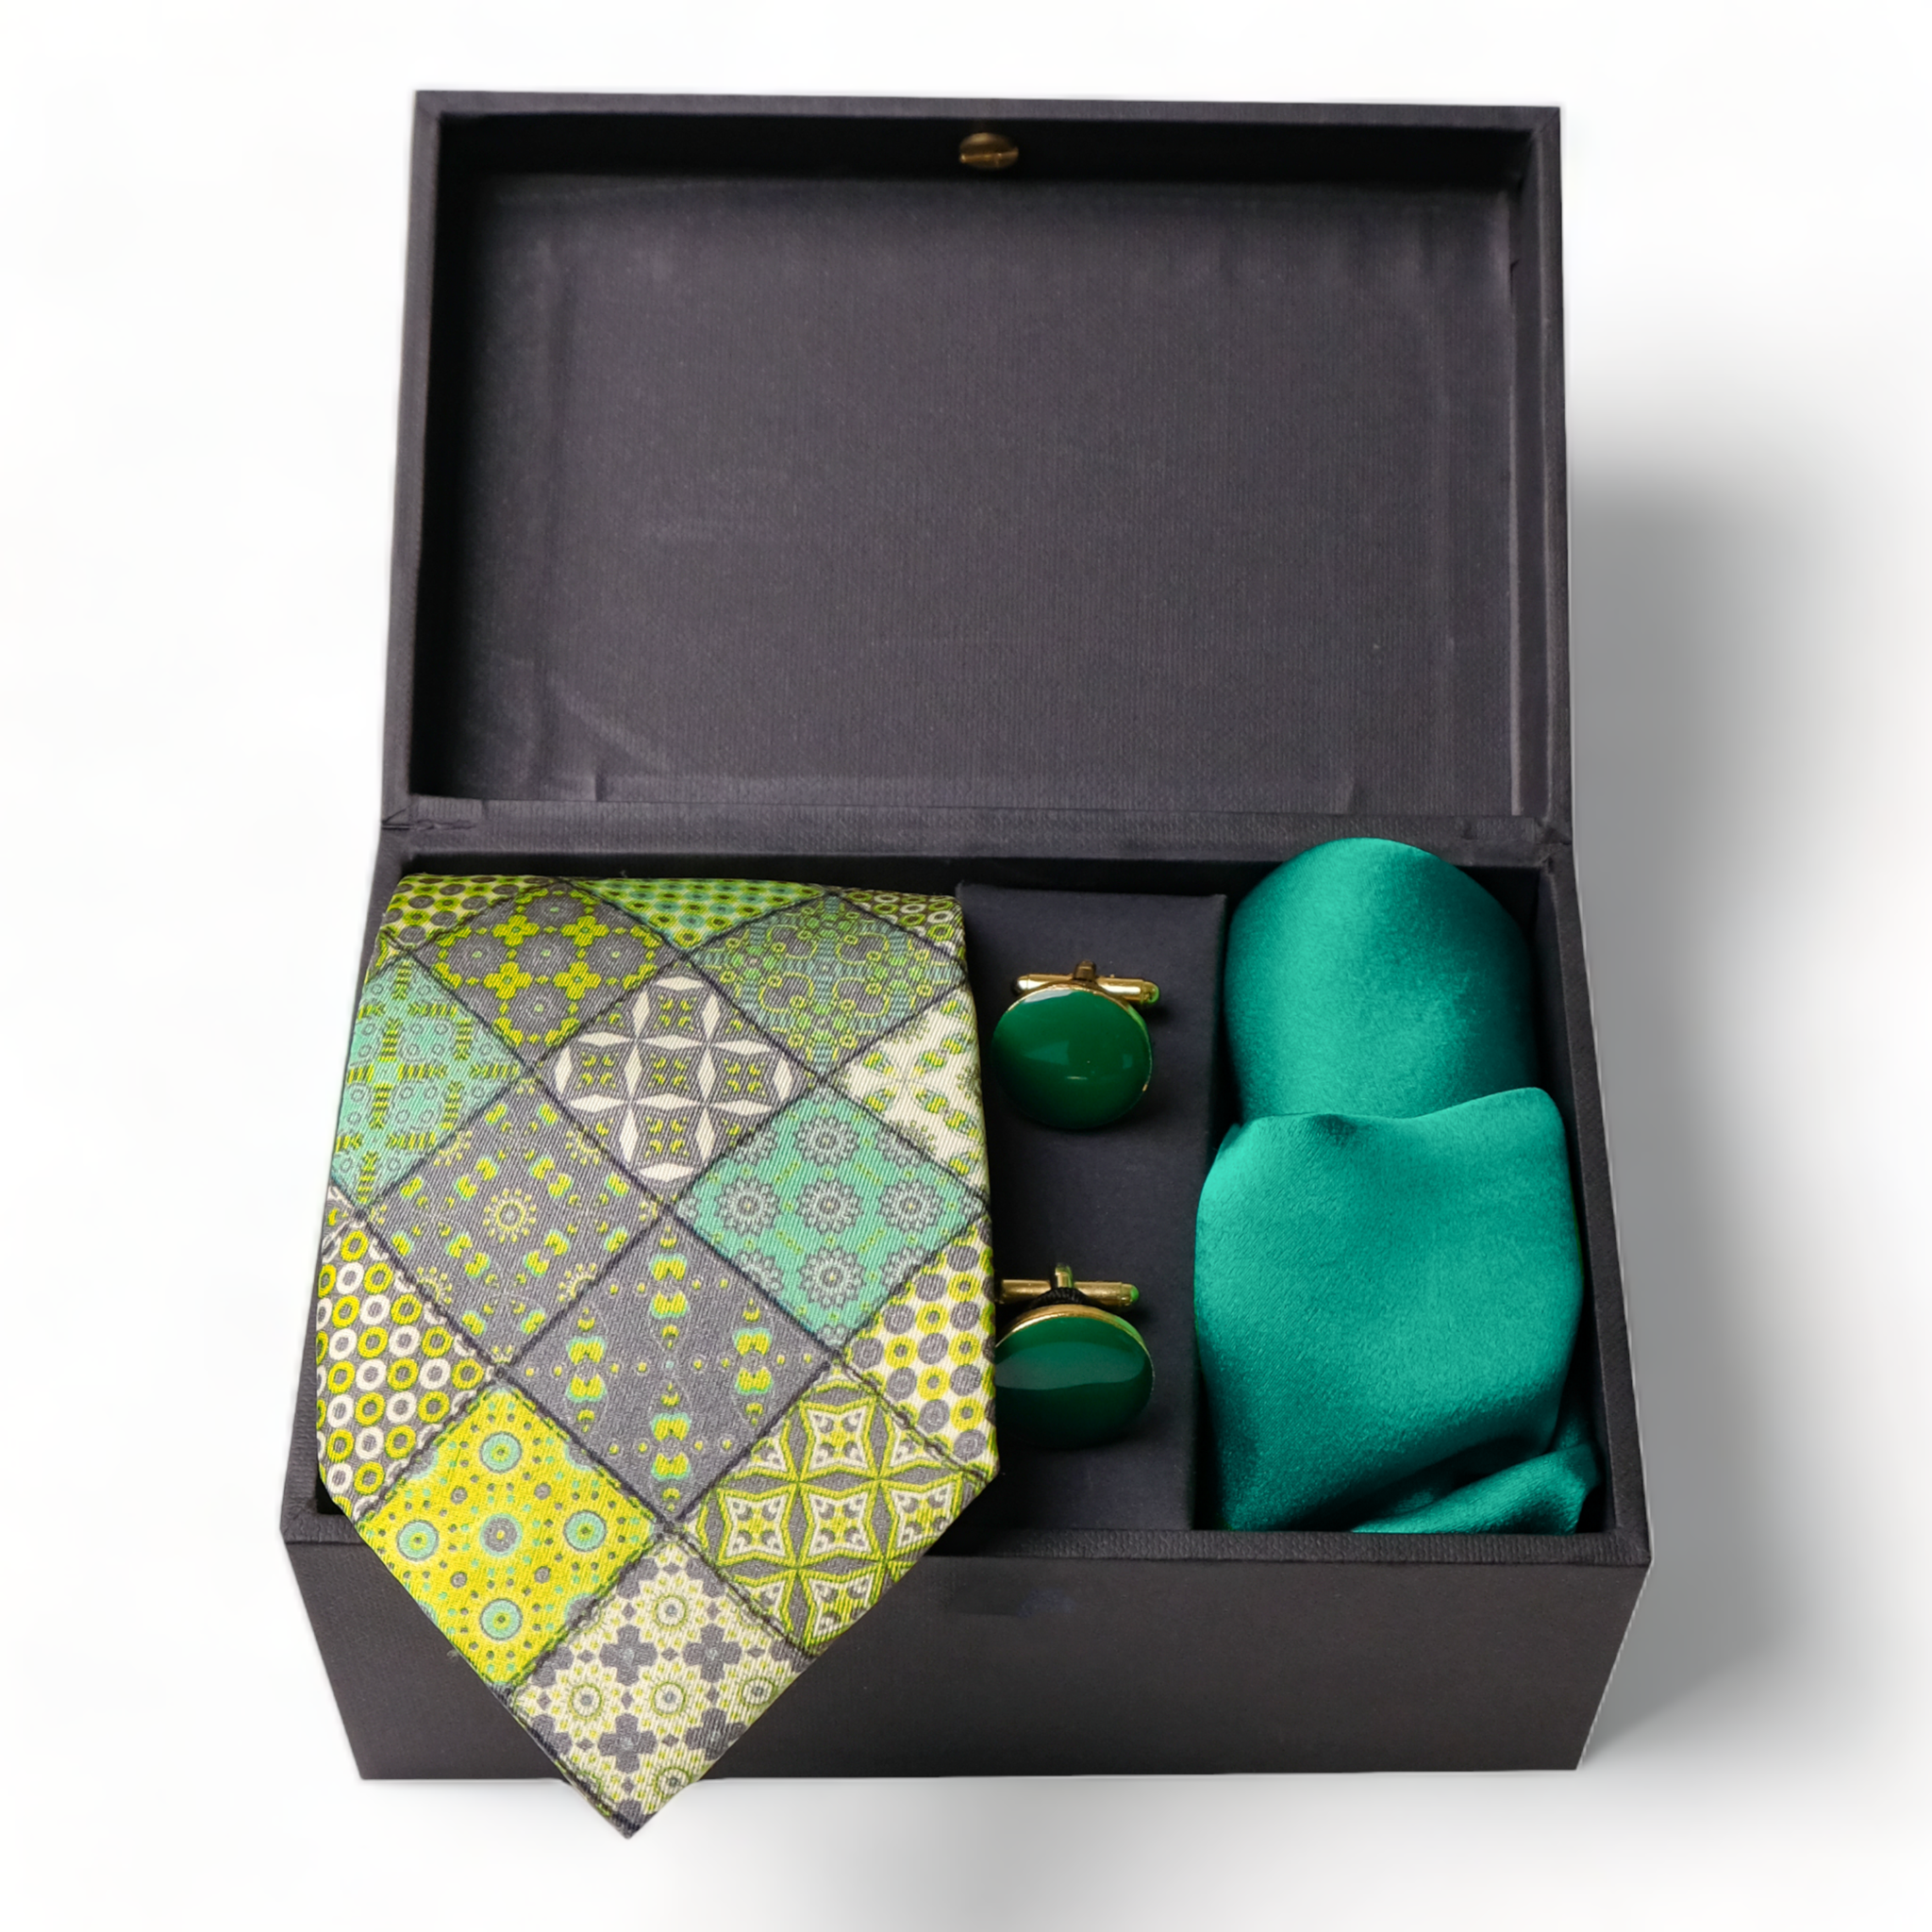 Chokore Special 3-in-1 Gift Set for Him (Turquoise Pocket Square, Necktie, & Cufflinks)